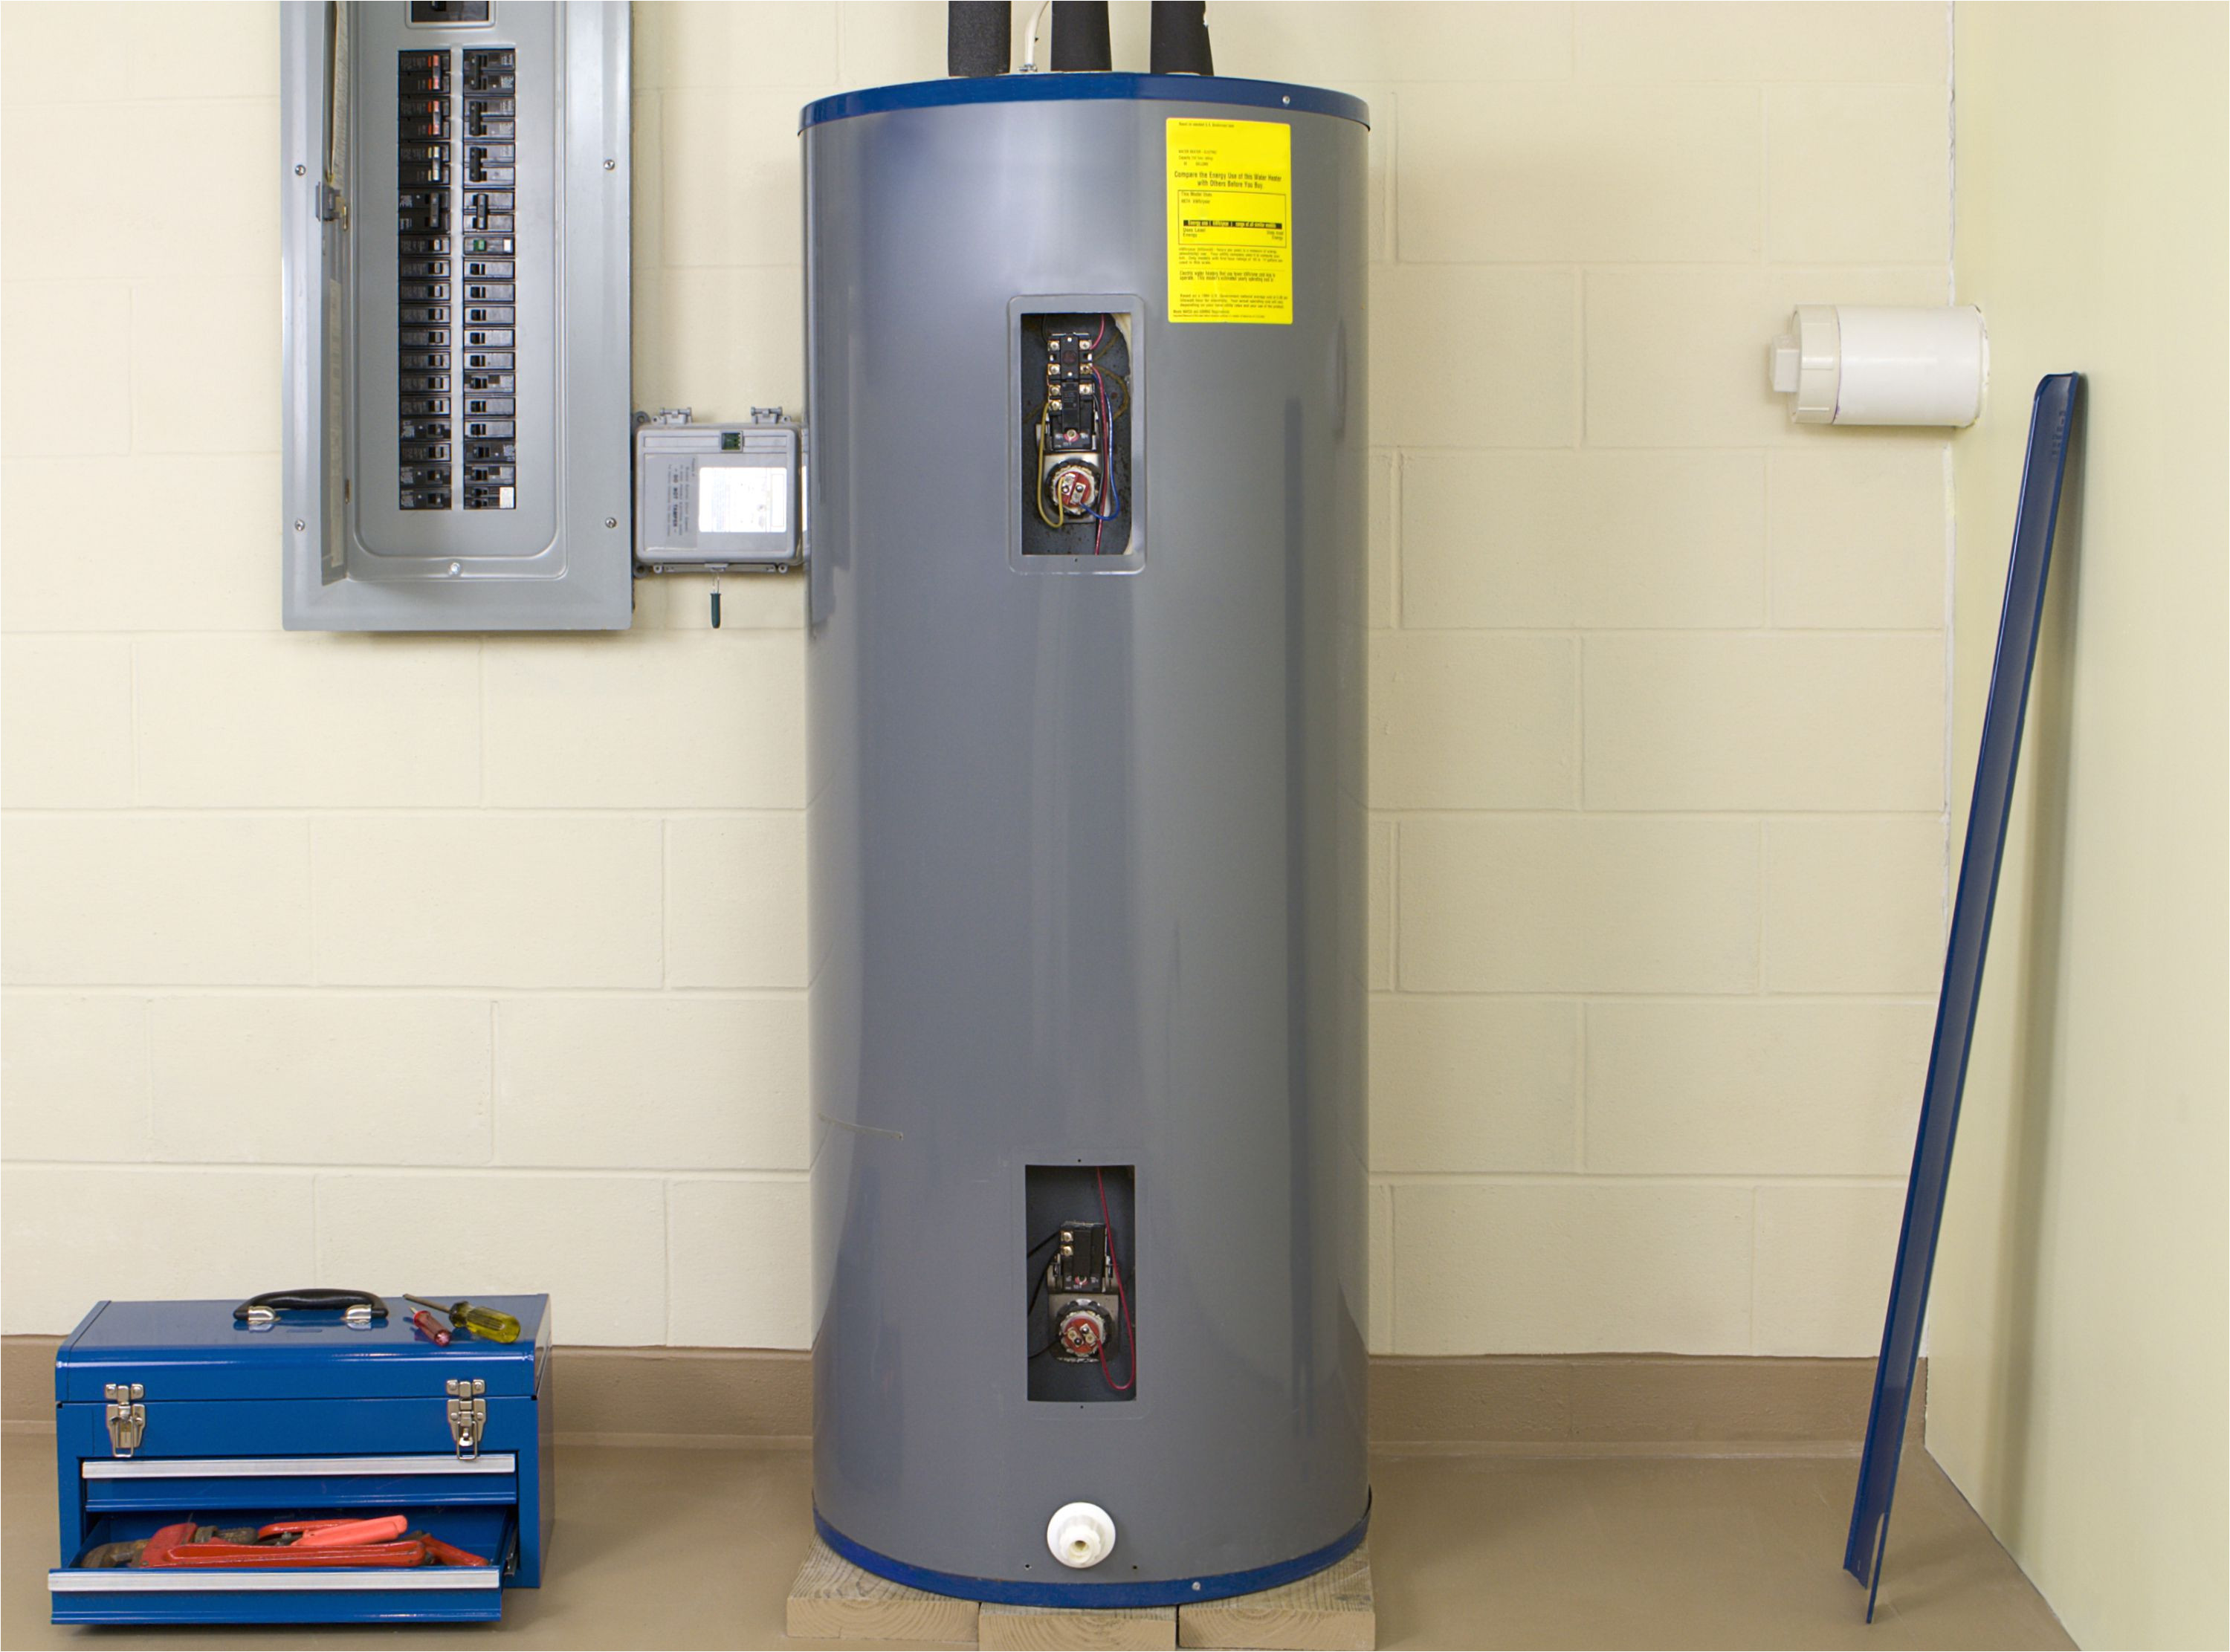 Whirlpool Energy Smart Hot Water Heater Troubleshooting How to Troubleshoot Electric Hot Water Heater Problems